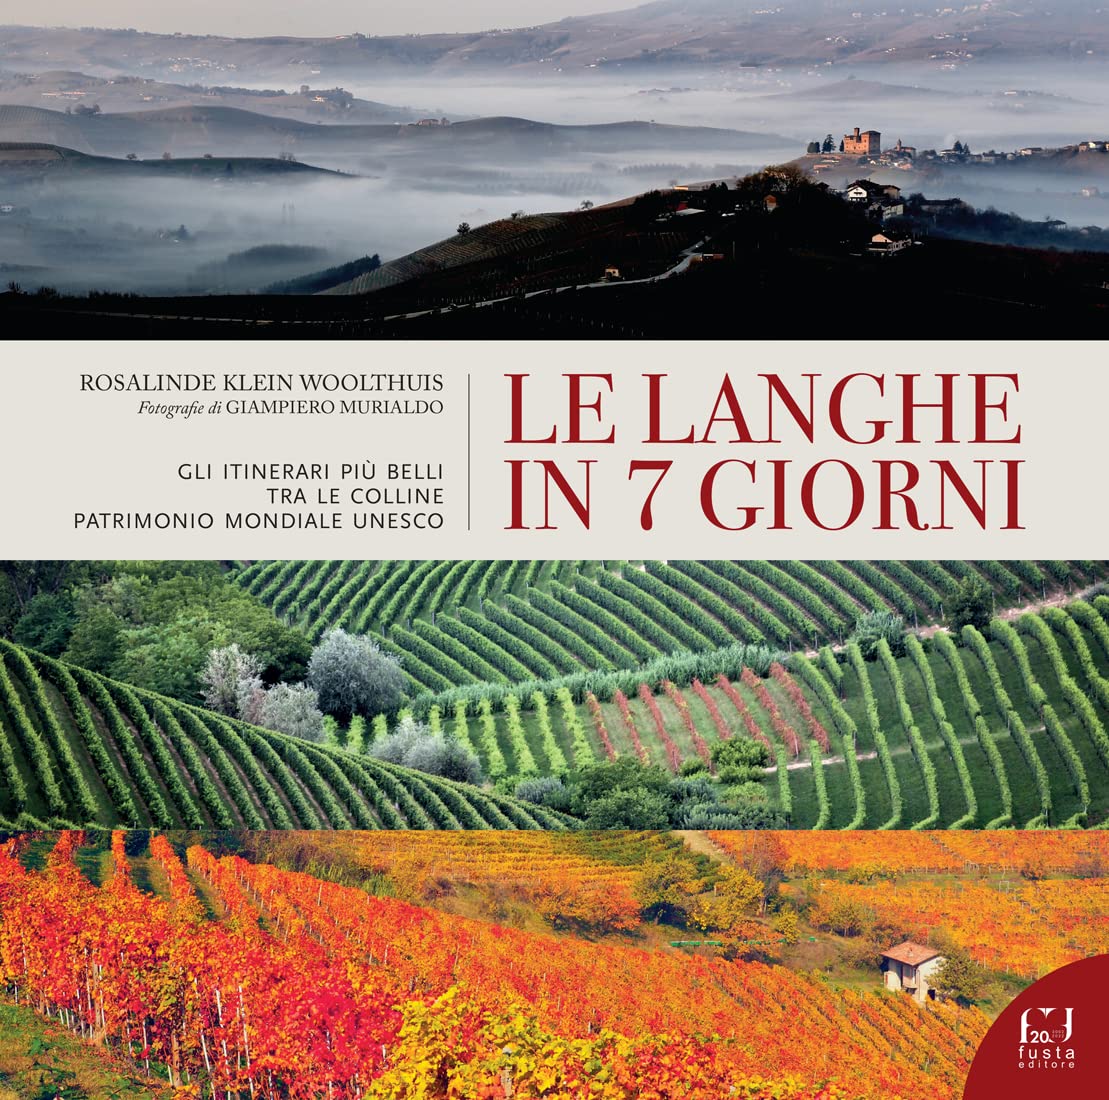 Le Langhe in 7 giorni - Rosalinde Klein Woolthuis (libro)